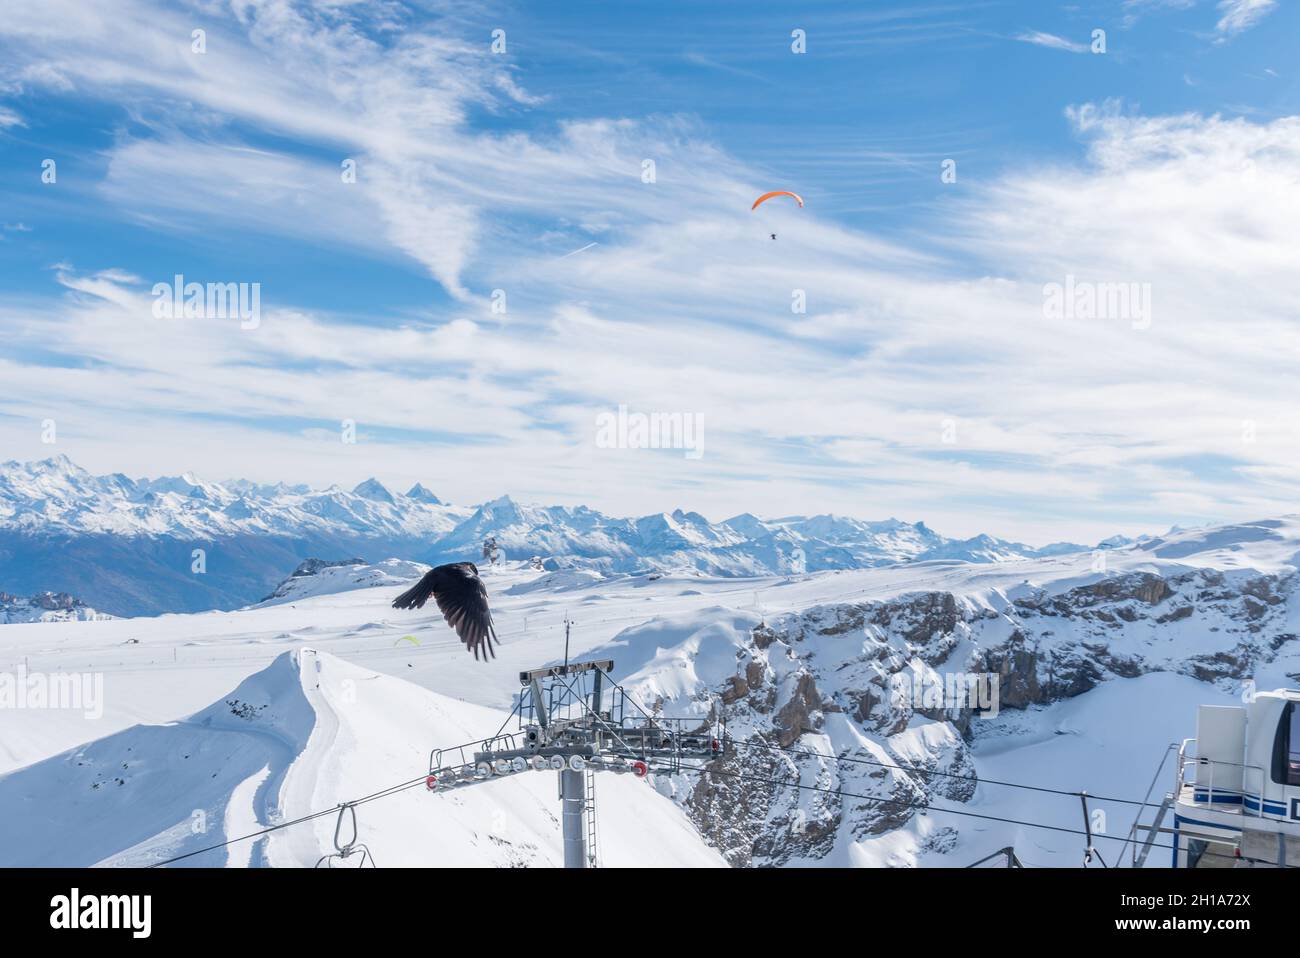 Landscape of the Diablerets Glacier at 3000 meters altitude a bird flying and a person doing paraglider Stock Photo